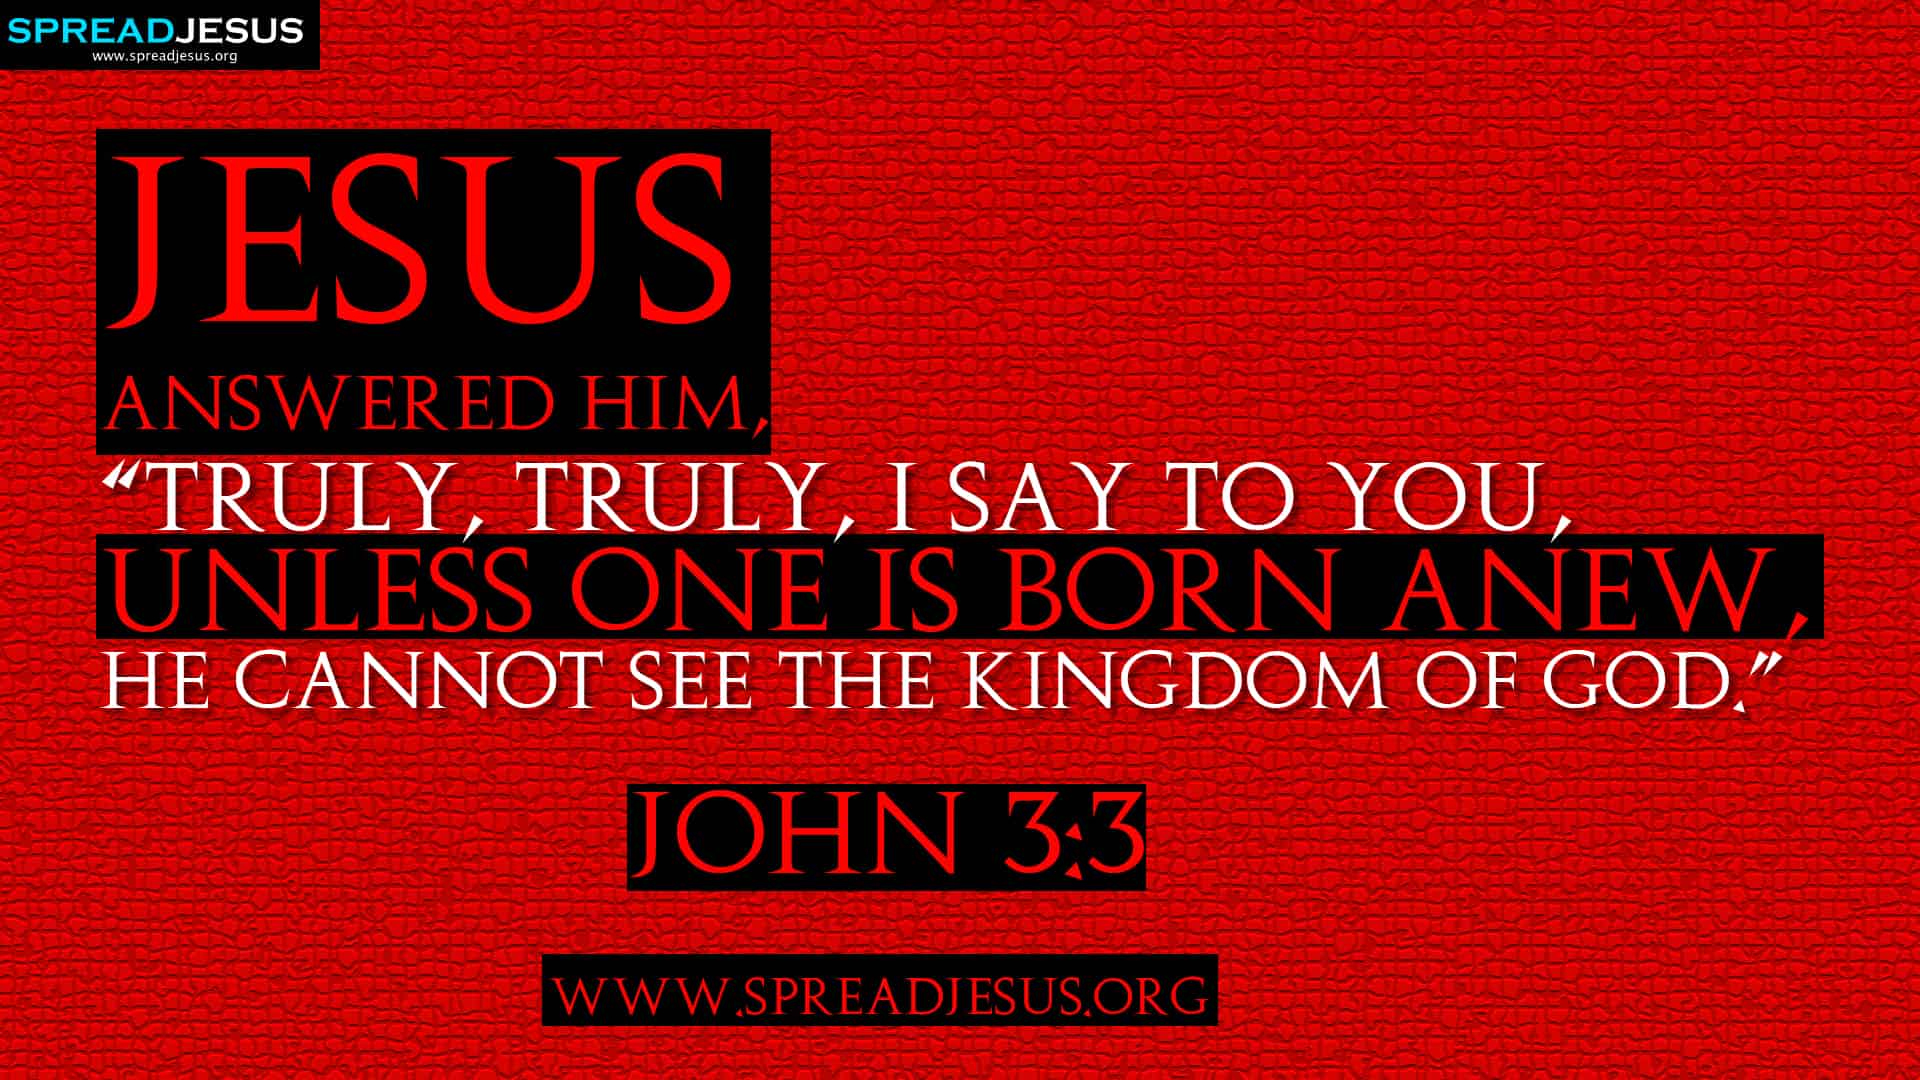 BIBLE QUOTES HD WALLPAPERS JOHN 3:3 FREE DOWNLOAD Jesus answered1920 x 1080